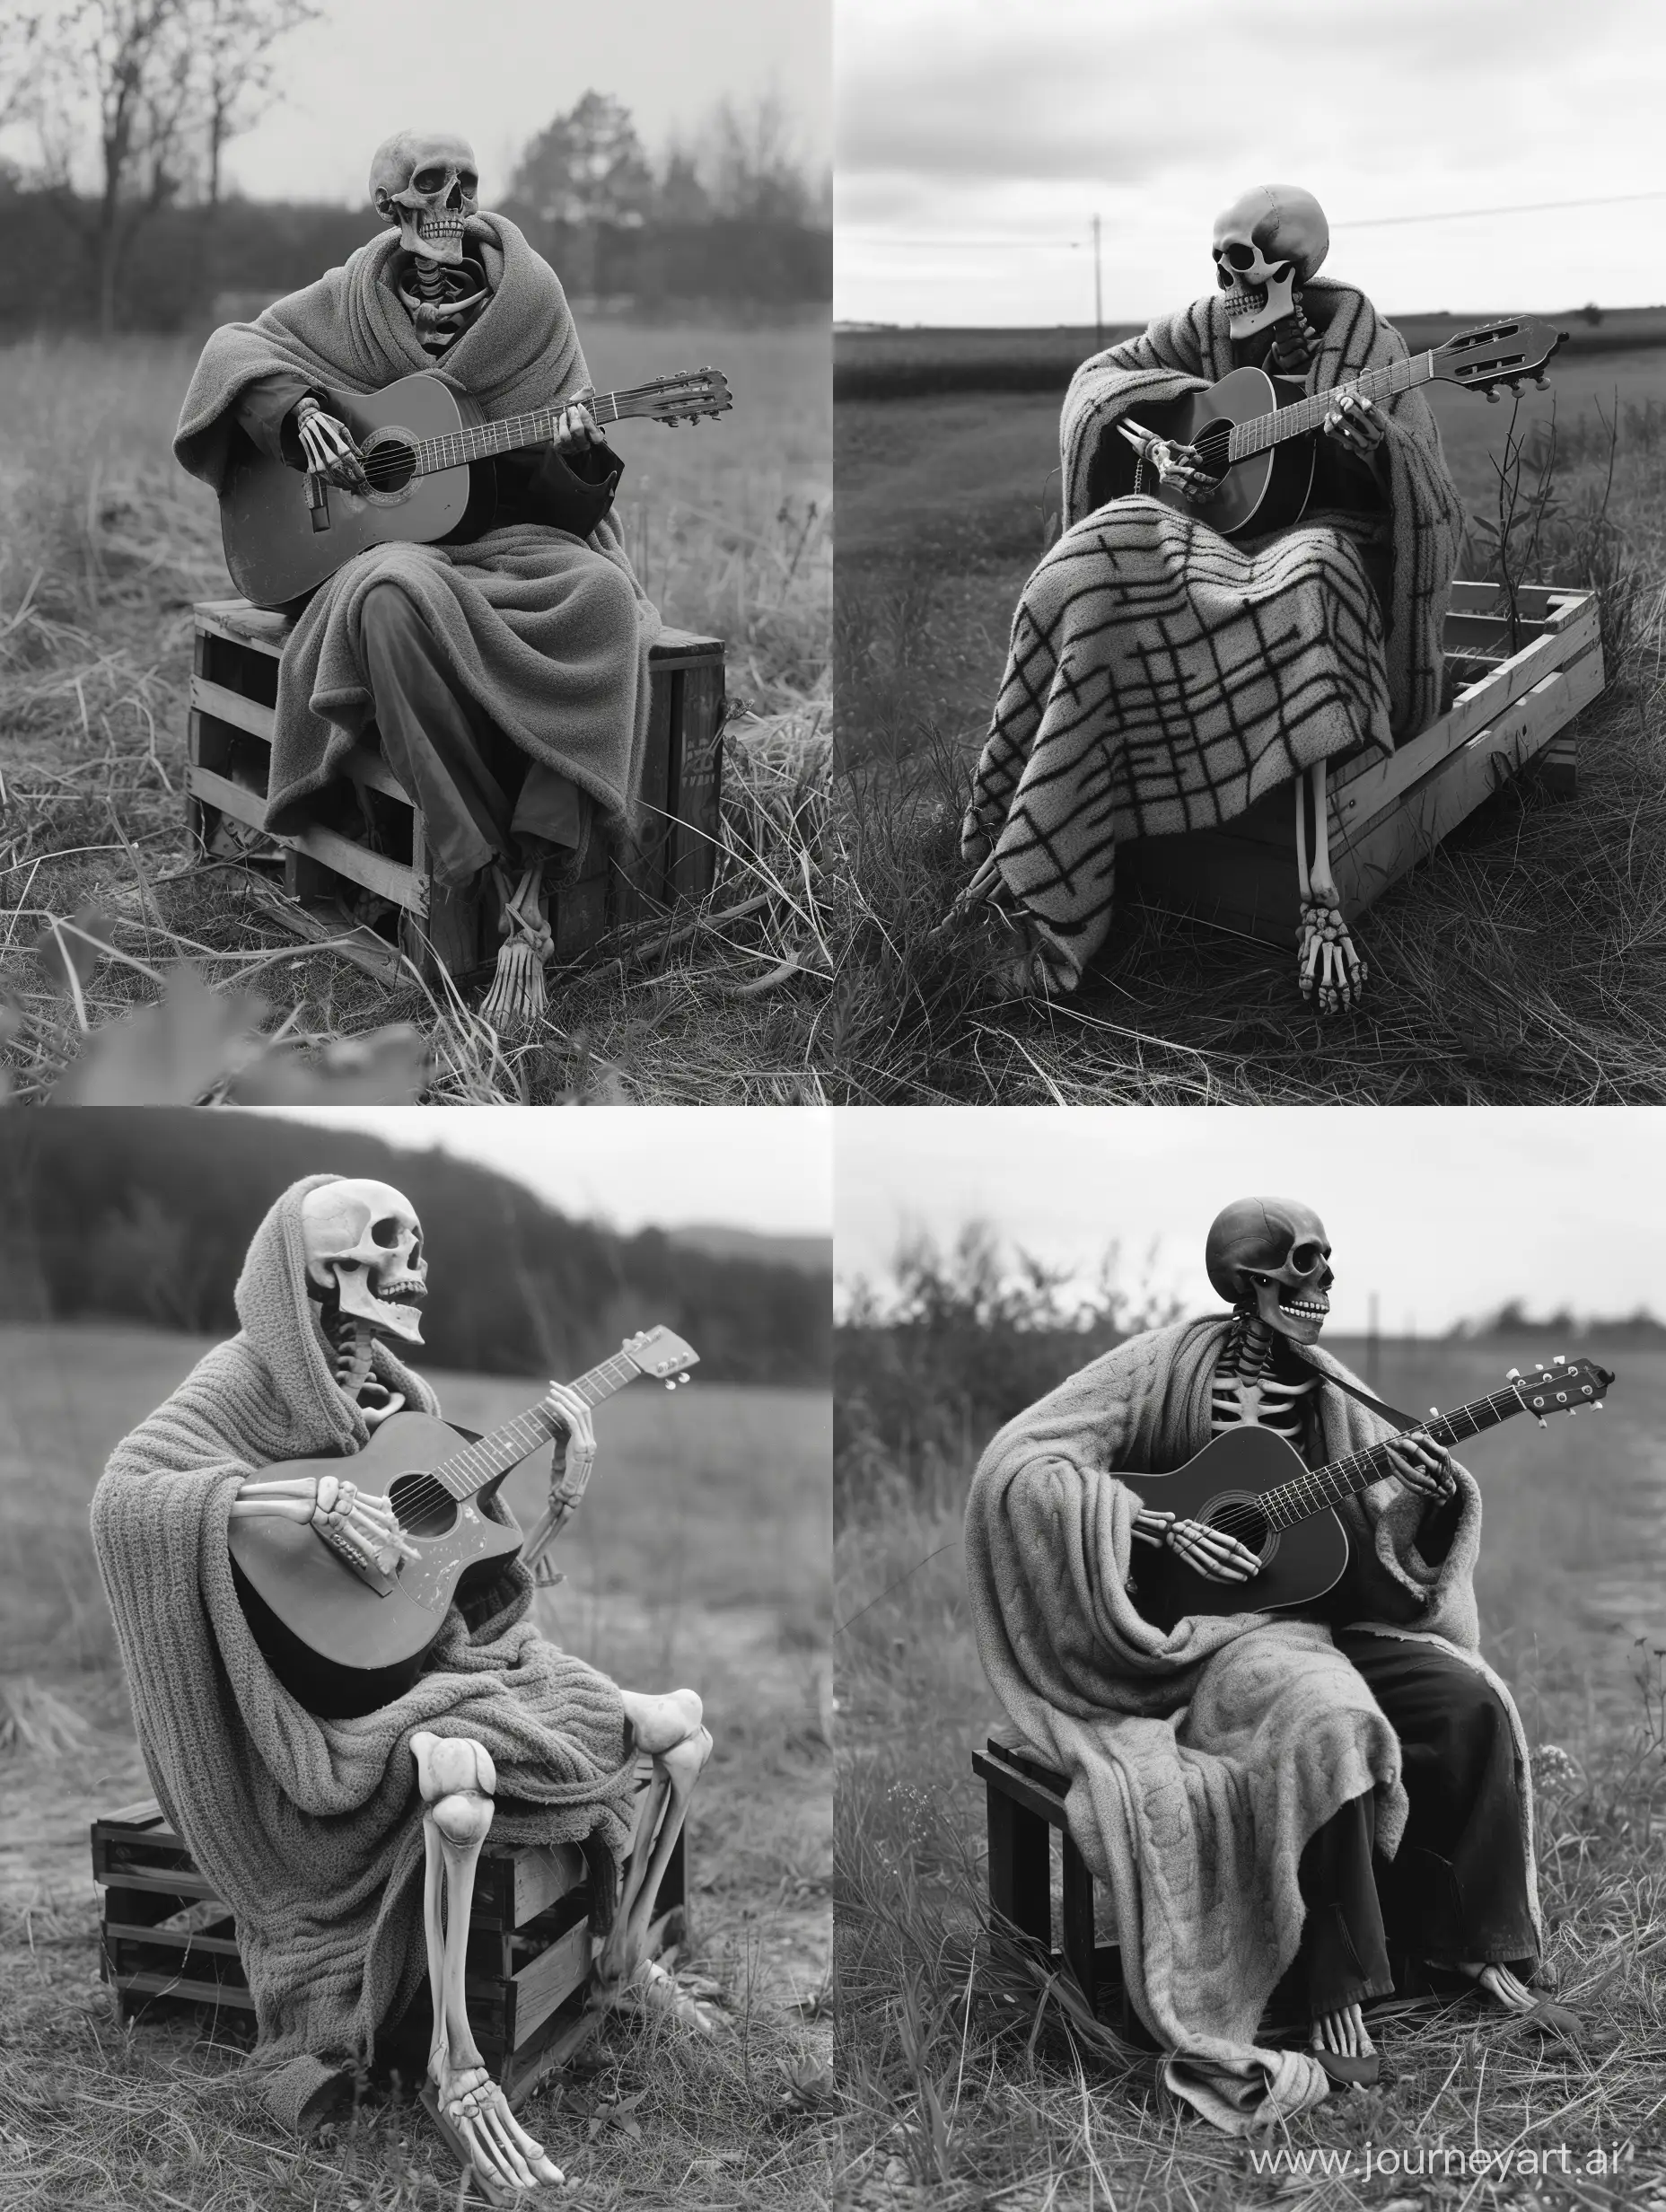 Grayscale image of skeletal figure wrapped snuggly in a wool blanket. He is sitting on a crate in a field playing an acoustic guitar, dark aesthetic, taken on provia